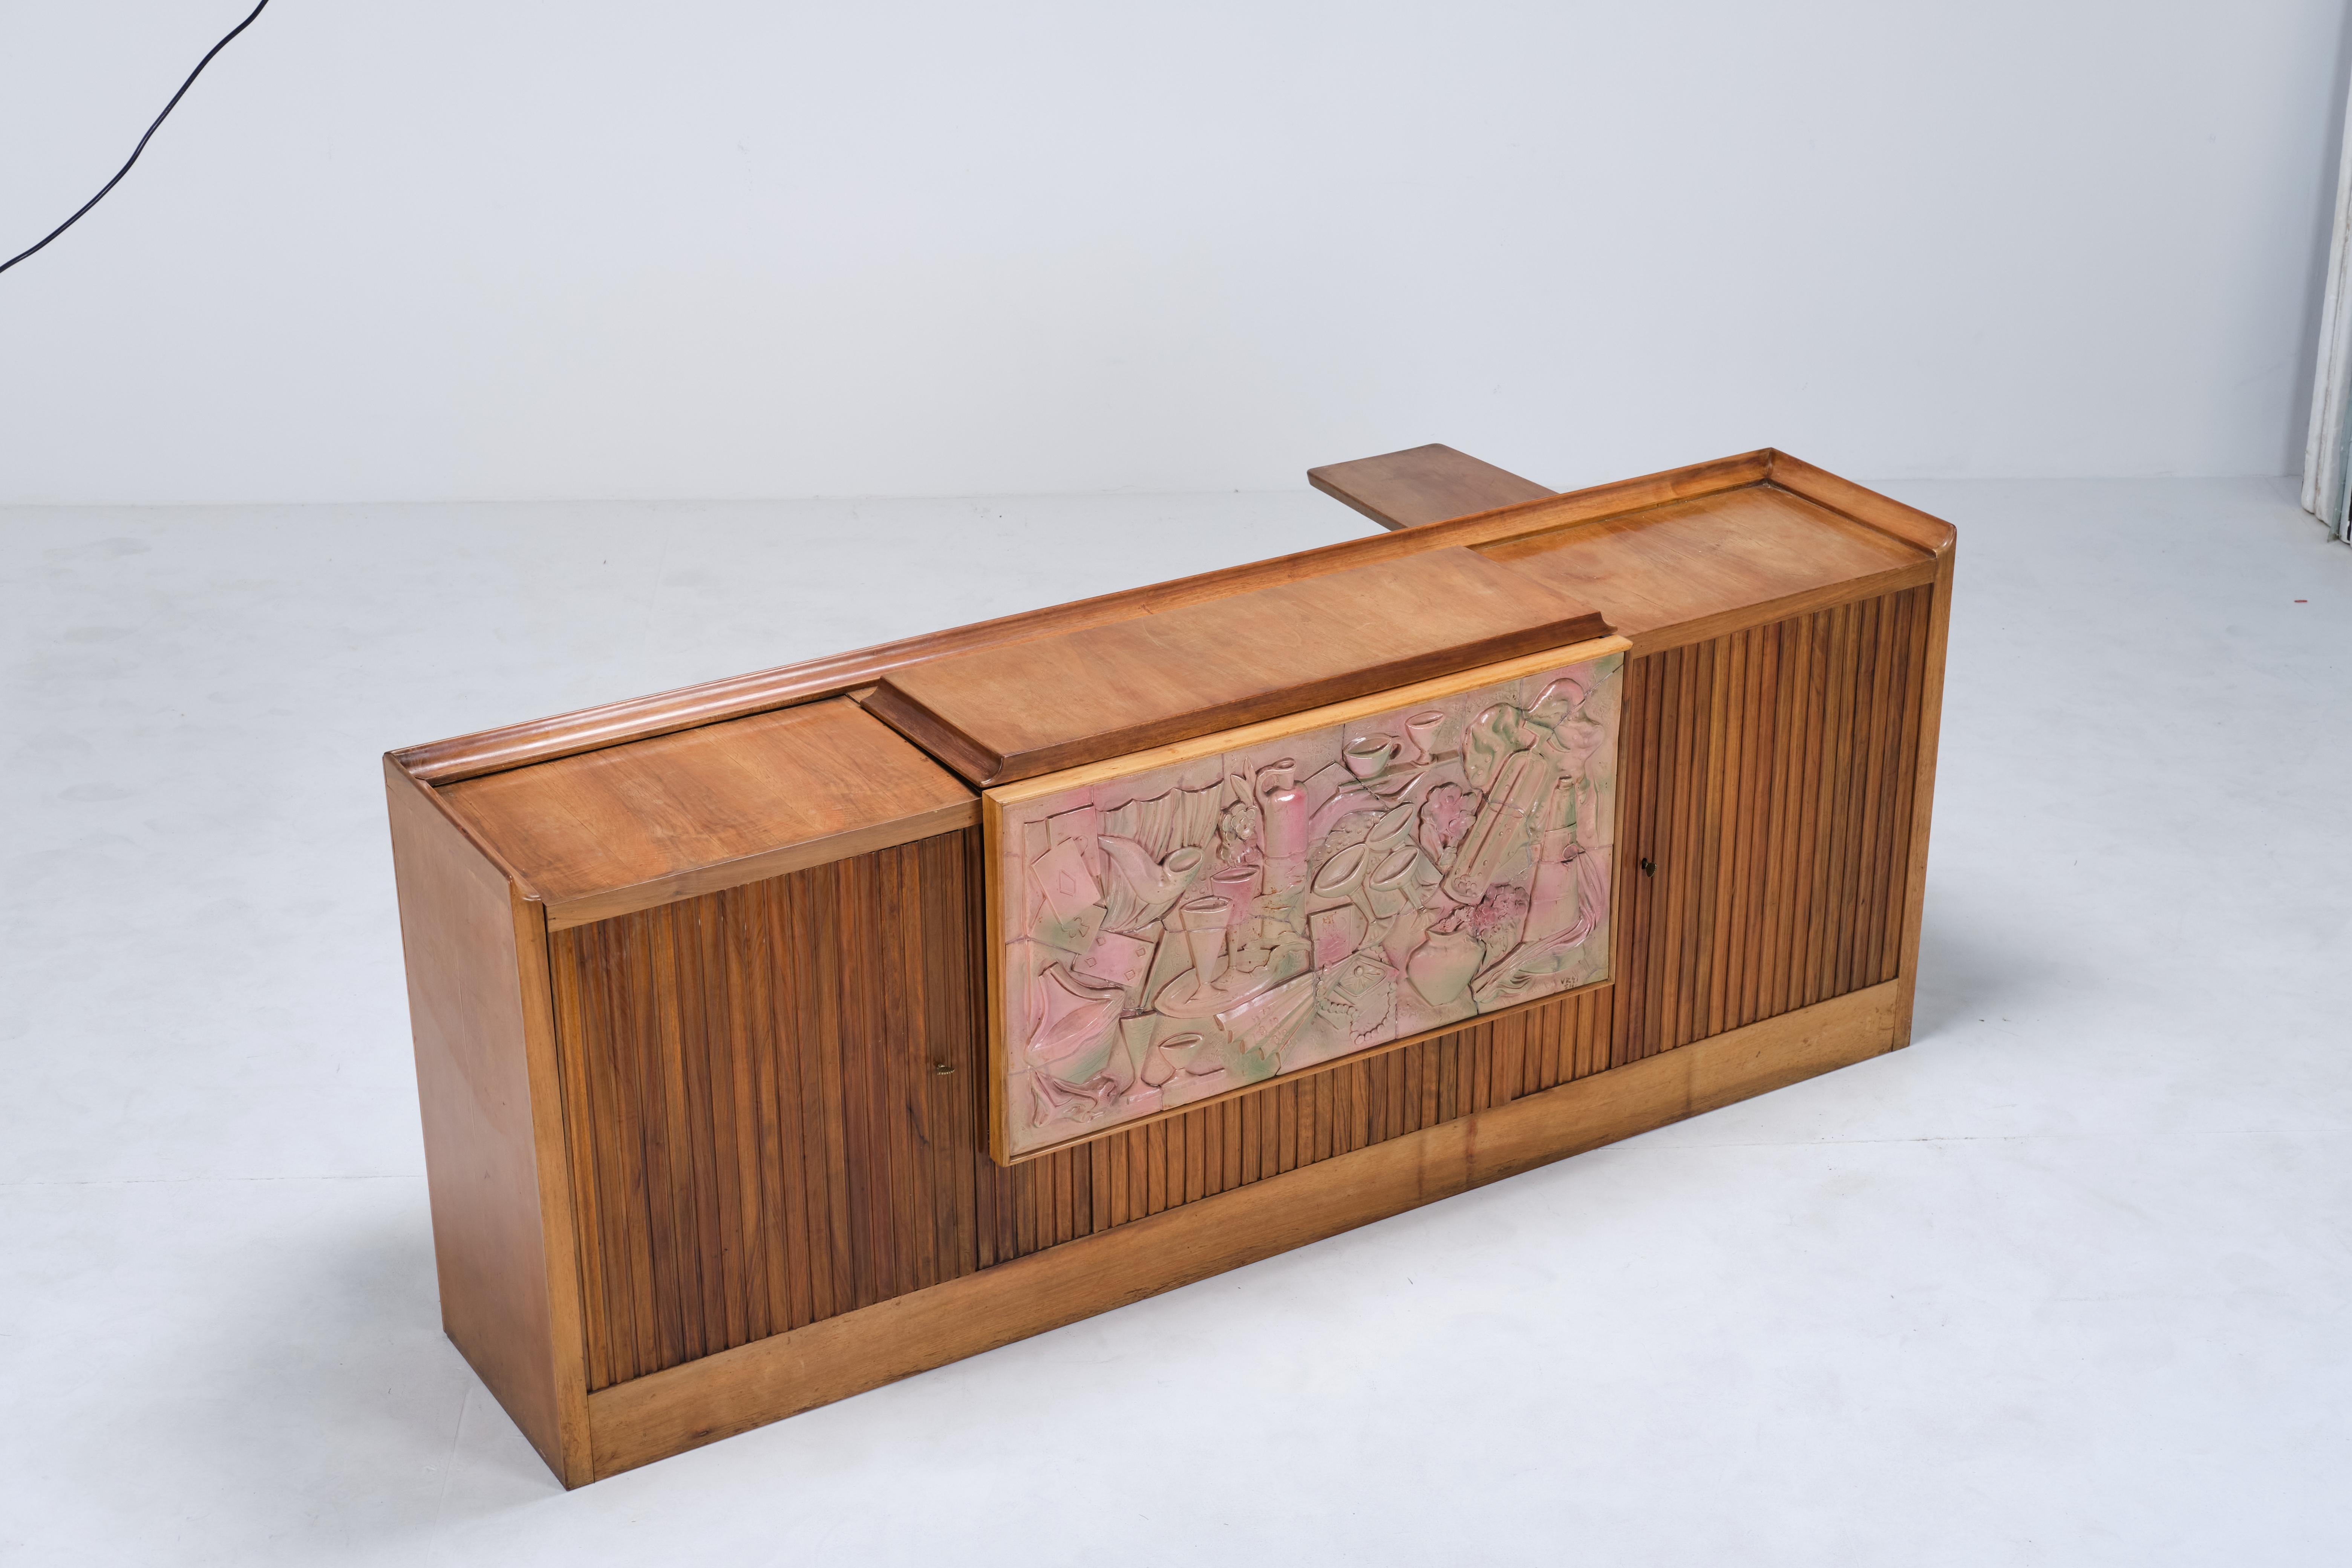 Giuseppe Anzani Midcentury bar cabinet with stunning glazed ceramic panel - 1950 In Fair Condition For Sale In Milan, IT